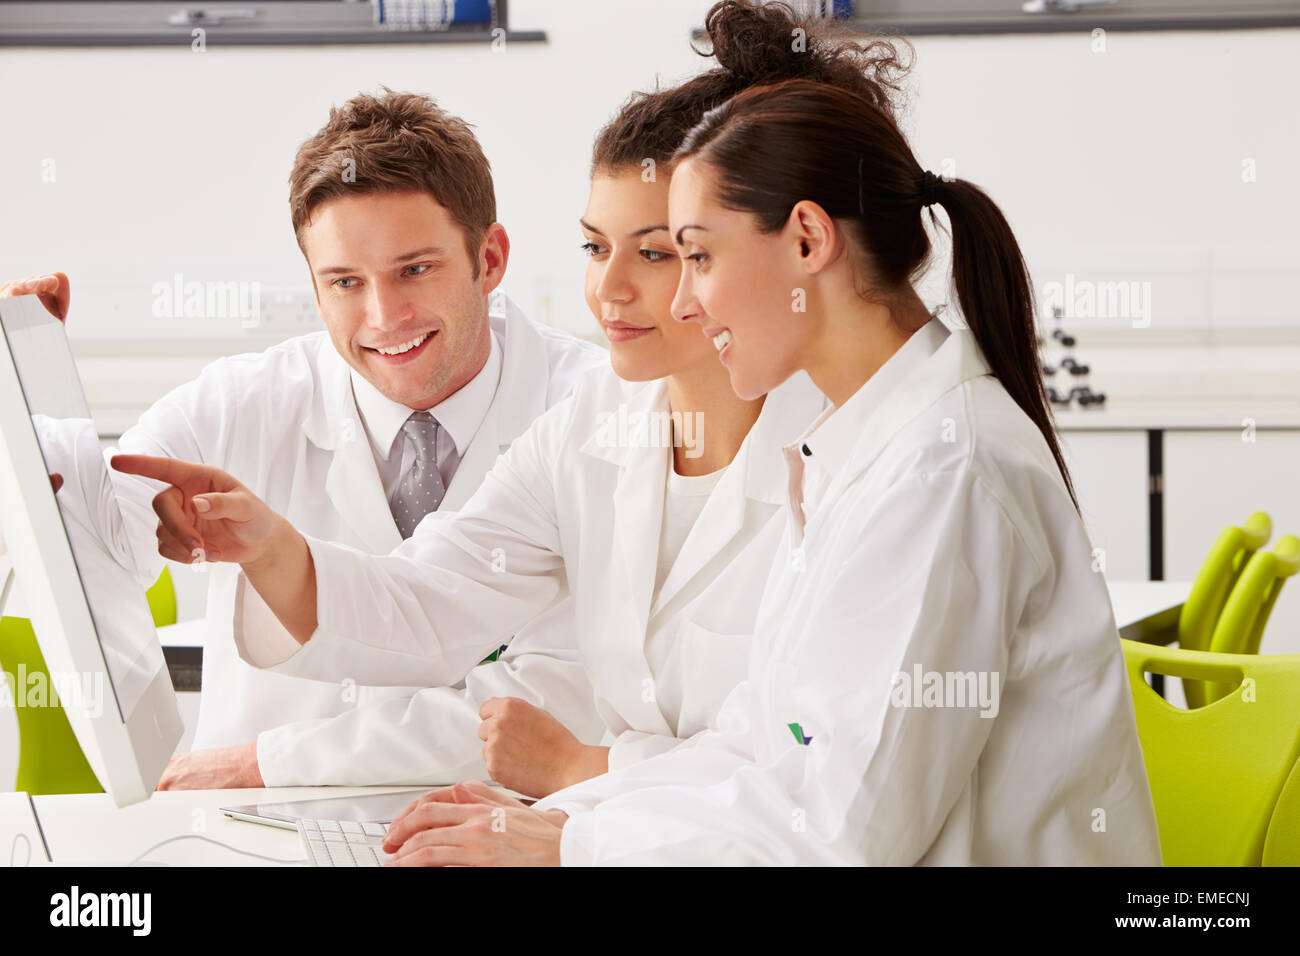 Group Of Scientists Checking Laboratory Results On Computer Stock Photo